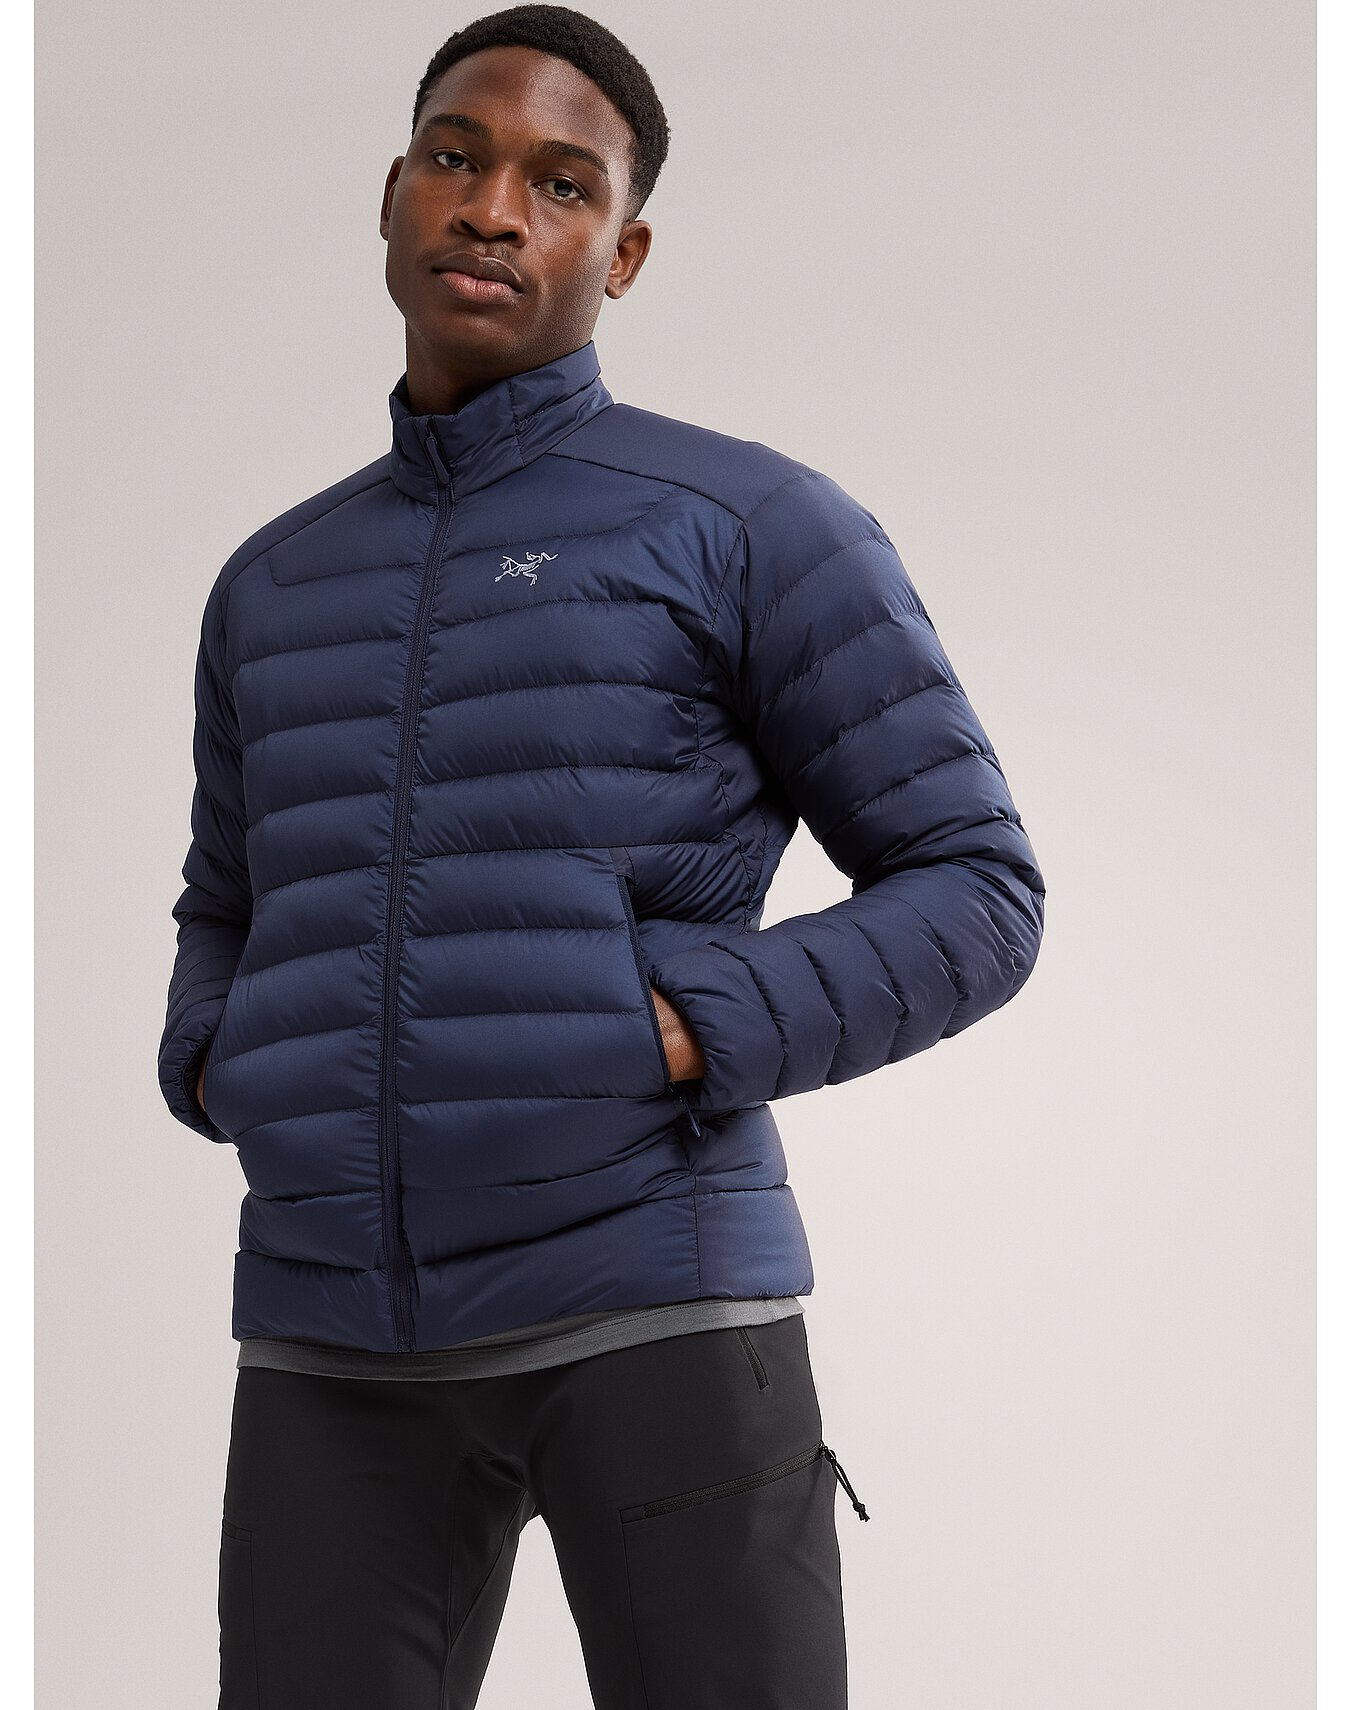 Arcteryx Jacket: The Epitome of Outdoor Performance Wear插图3